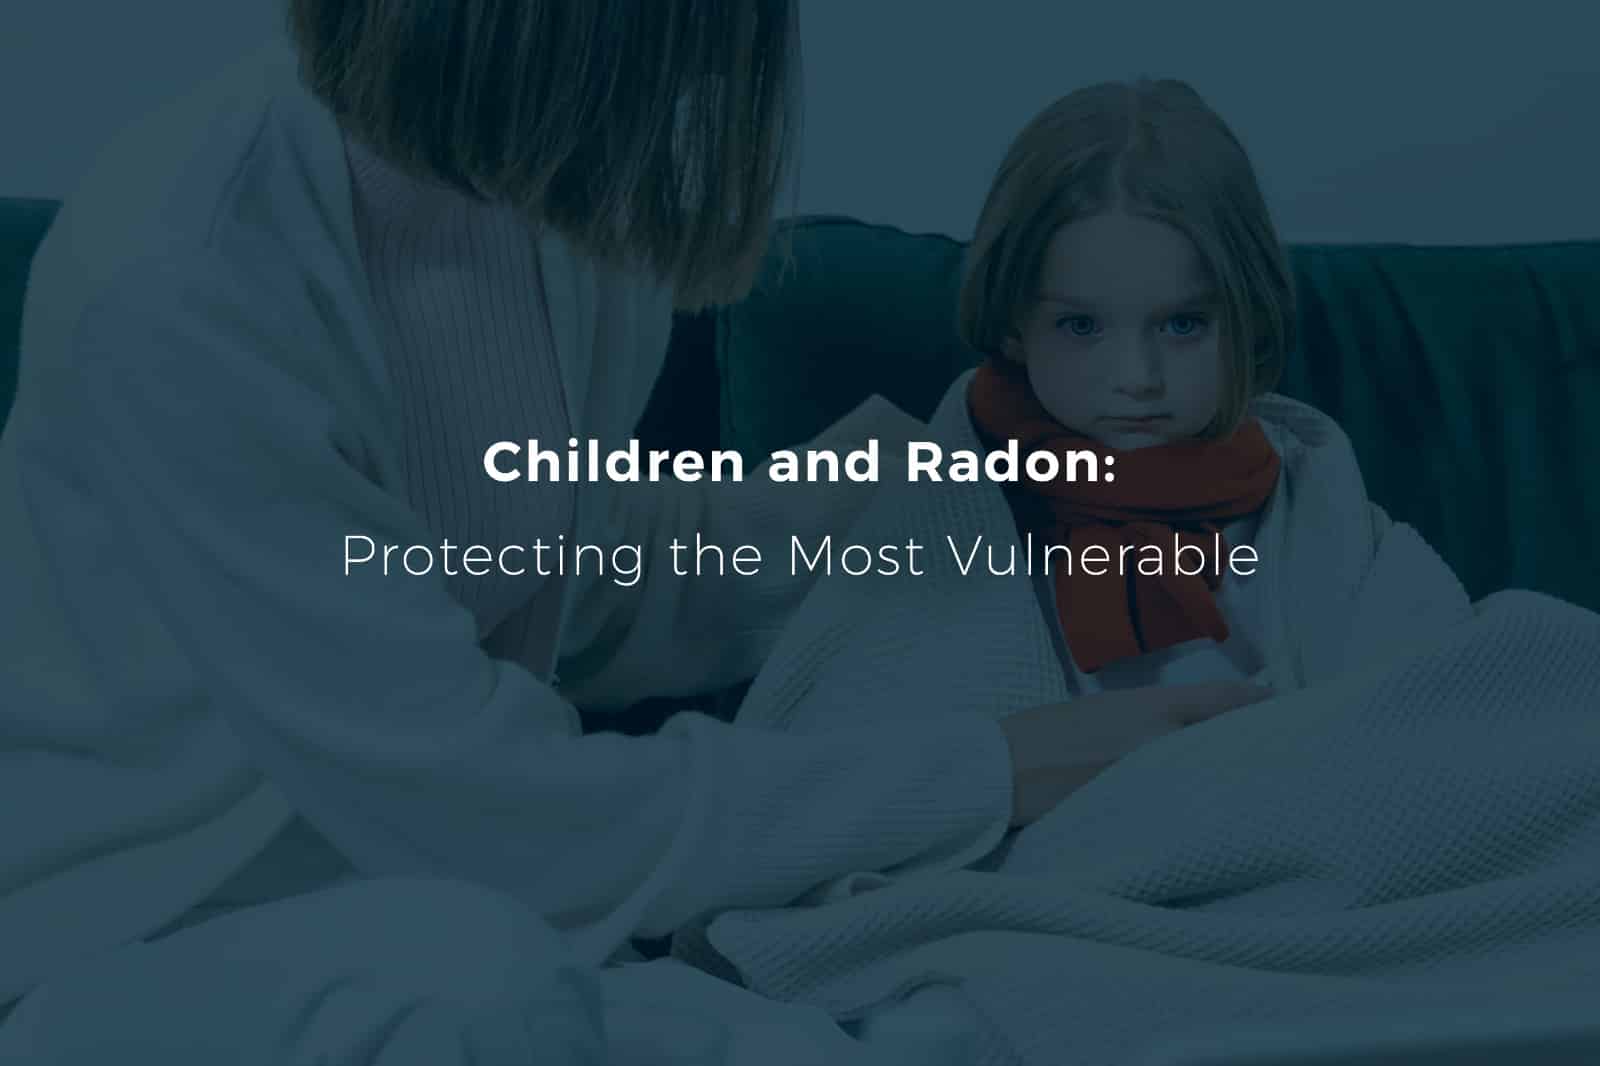 Woman sitting with her daughter, with a headline that says "Children and Radon: Protecting the Most Vulnerable"